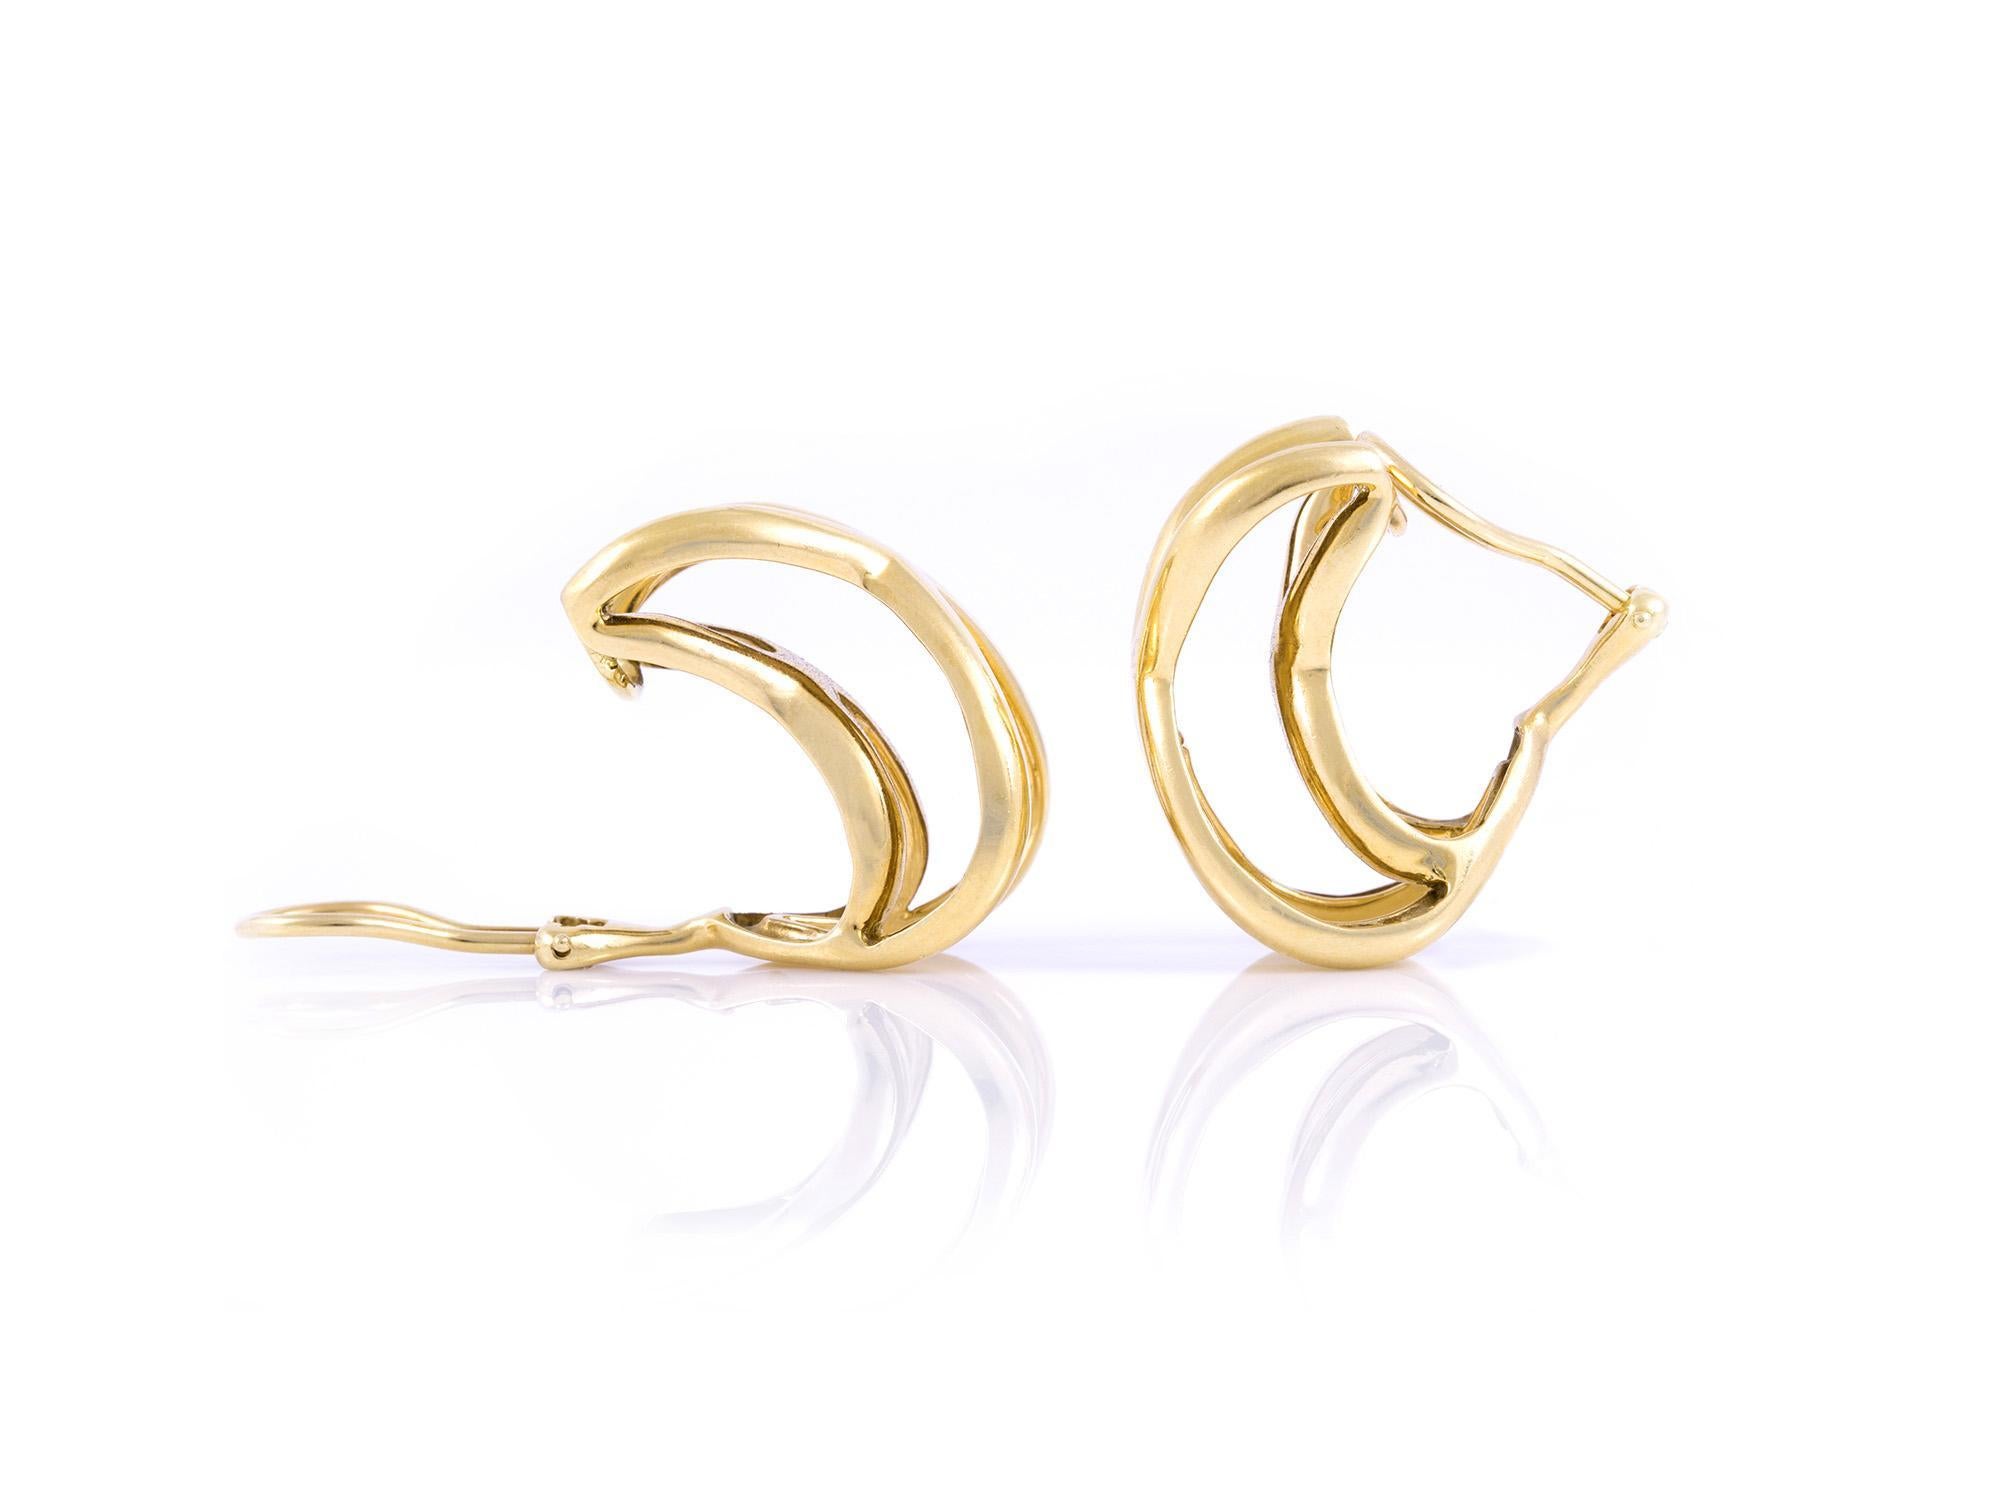 Vintage 1980s Tiffany & Co. Gold X Earrings In Good Condition For Sale In New York, NY